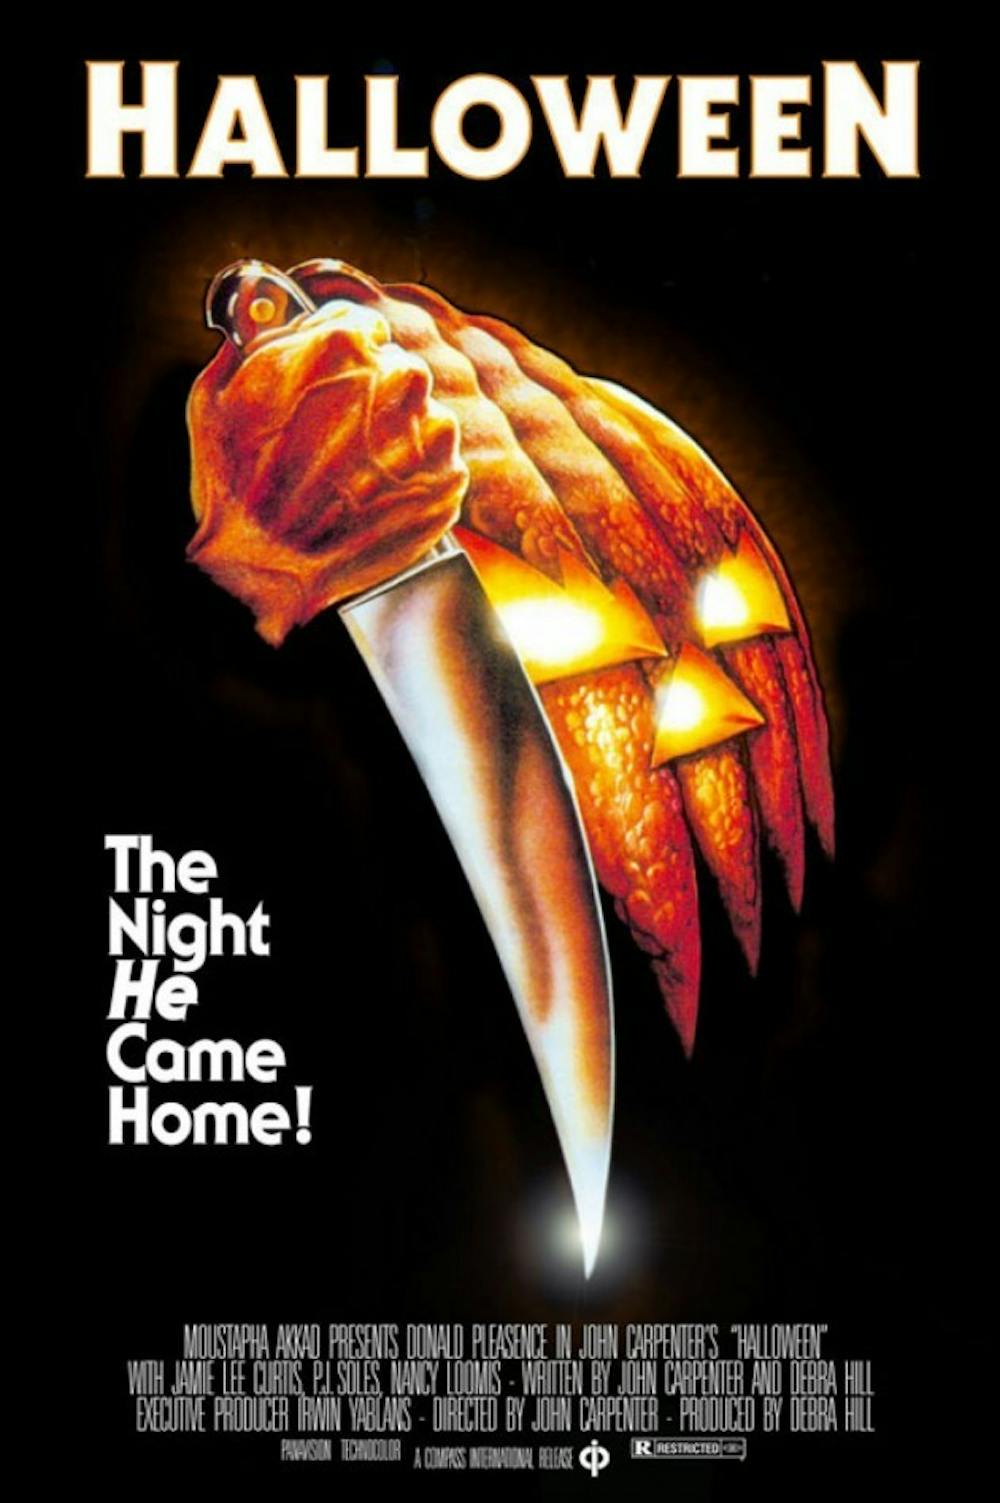 The original tale of Michael Myers launched an entire genre of slasher films and
immortalized Halloween&#39;s psychopathic antagonist as a pop culture icon.&nbsp;
Courtesy of Falcon International Productions